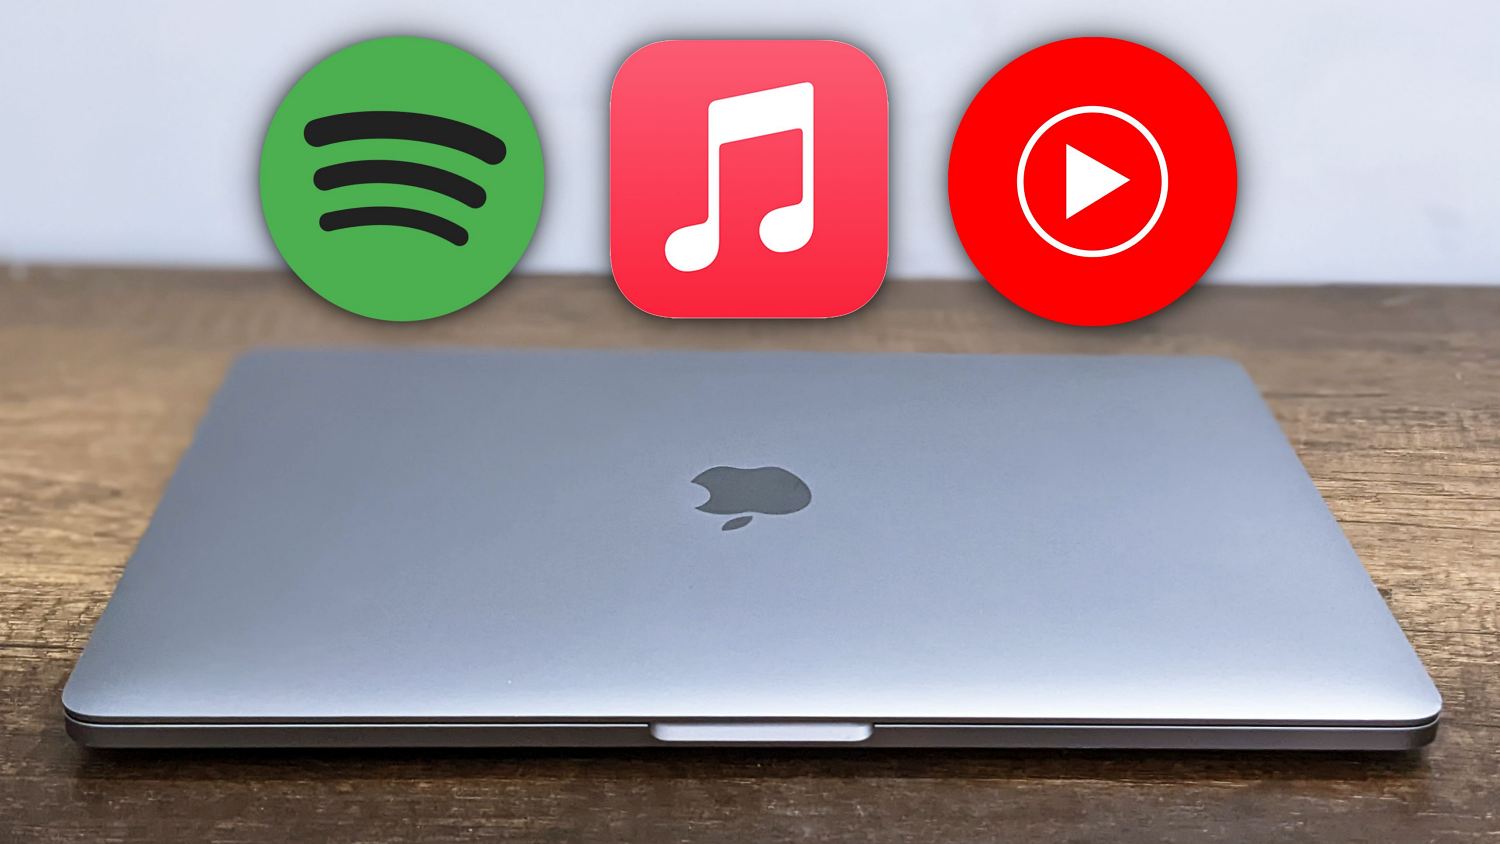 3 Ways to Keep Music Playing When MacBook is Closed